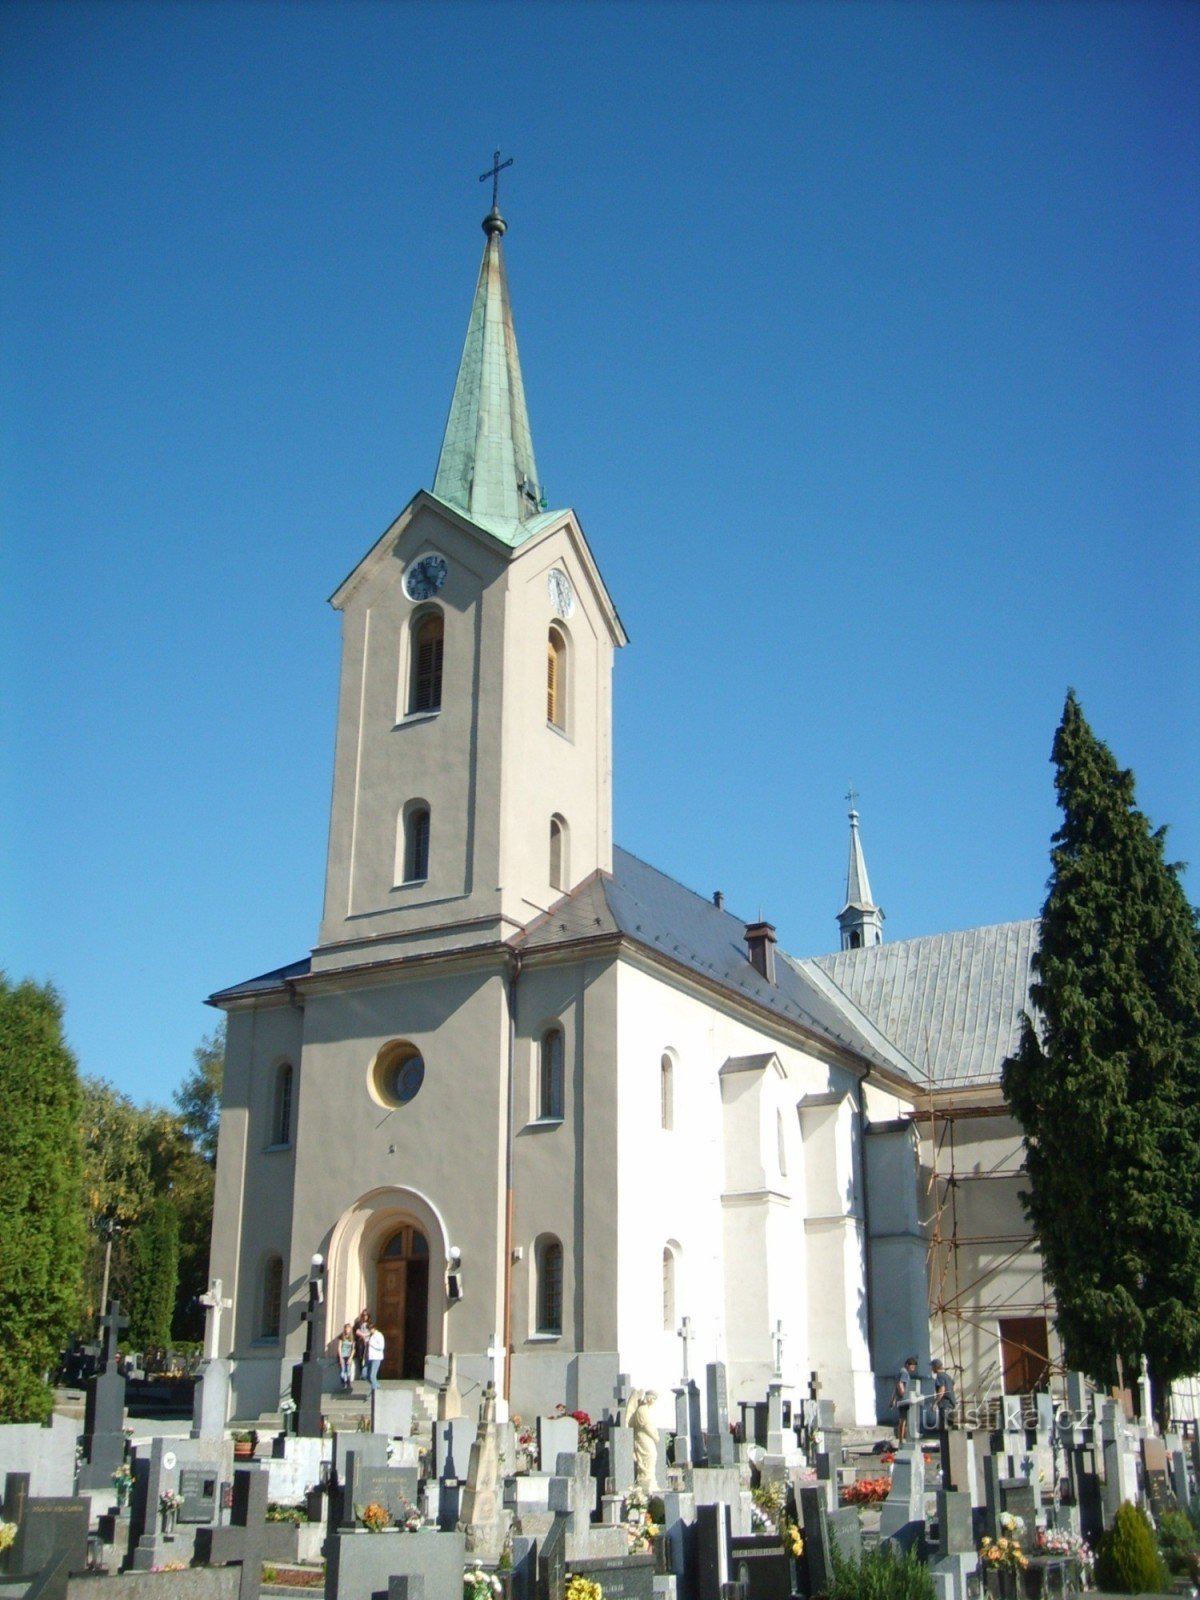 view of the church